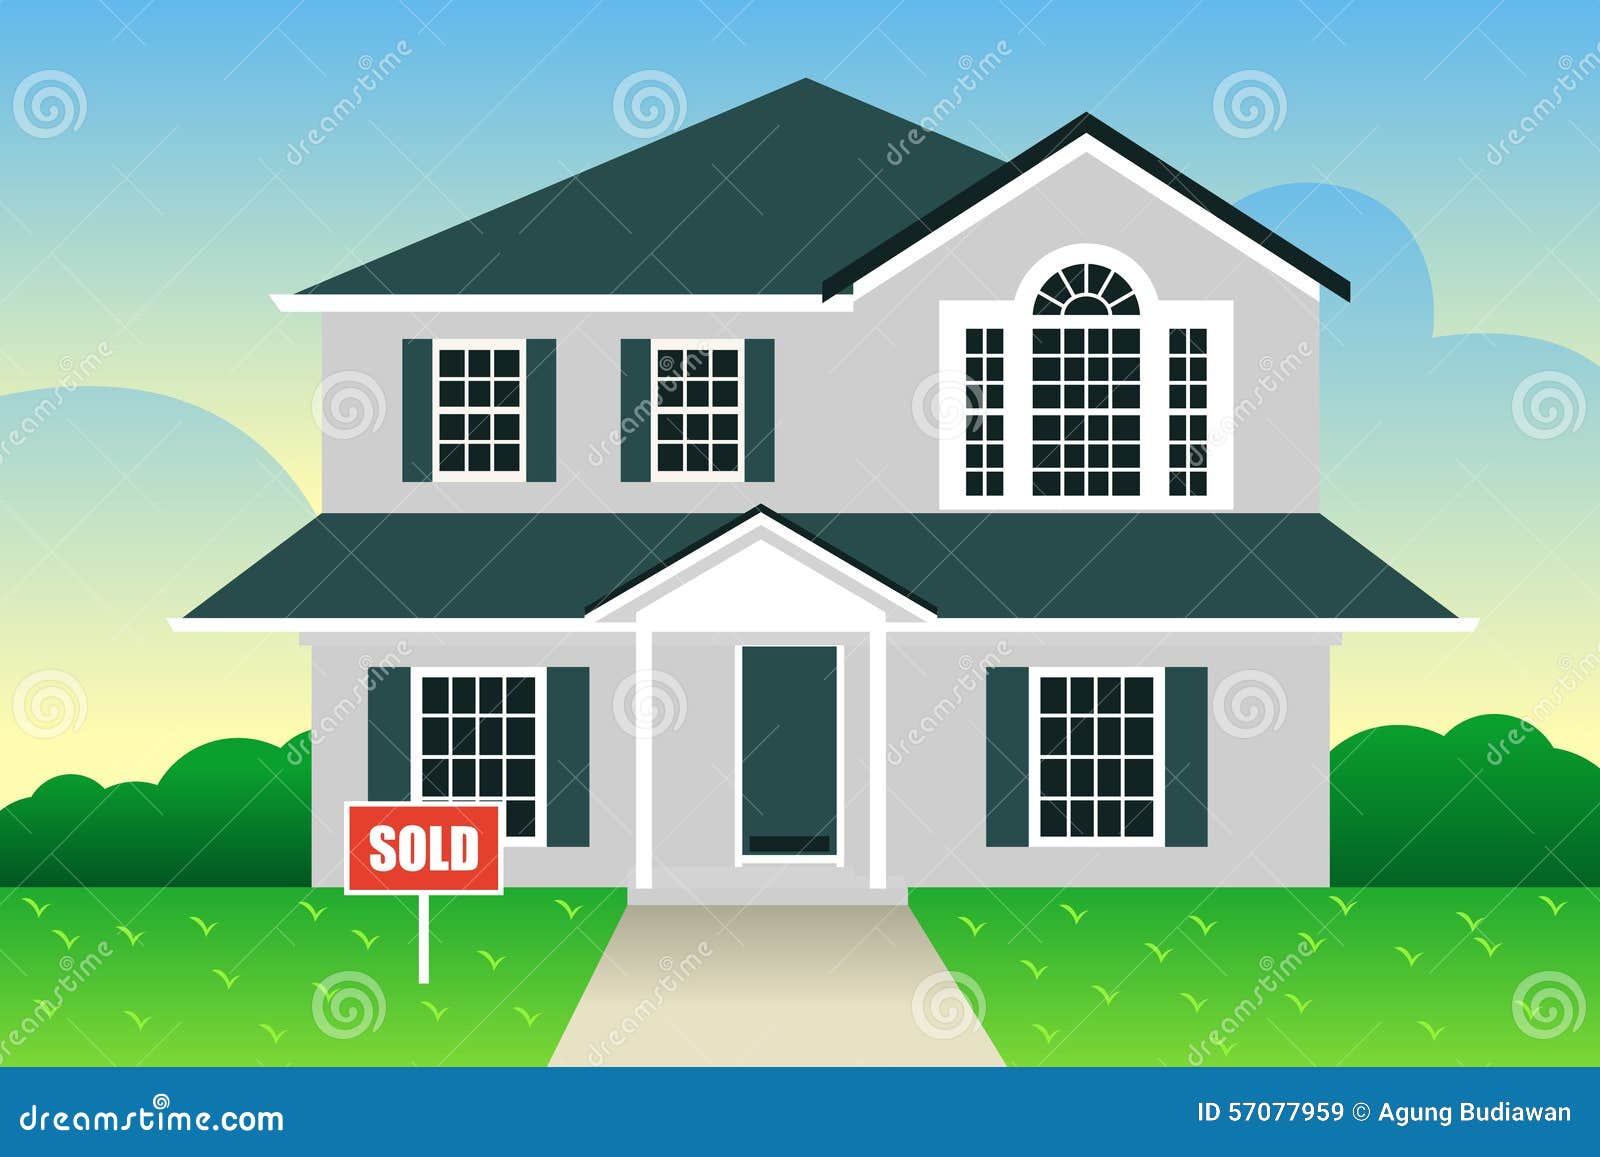 clipart home for sale - photo #31